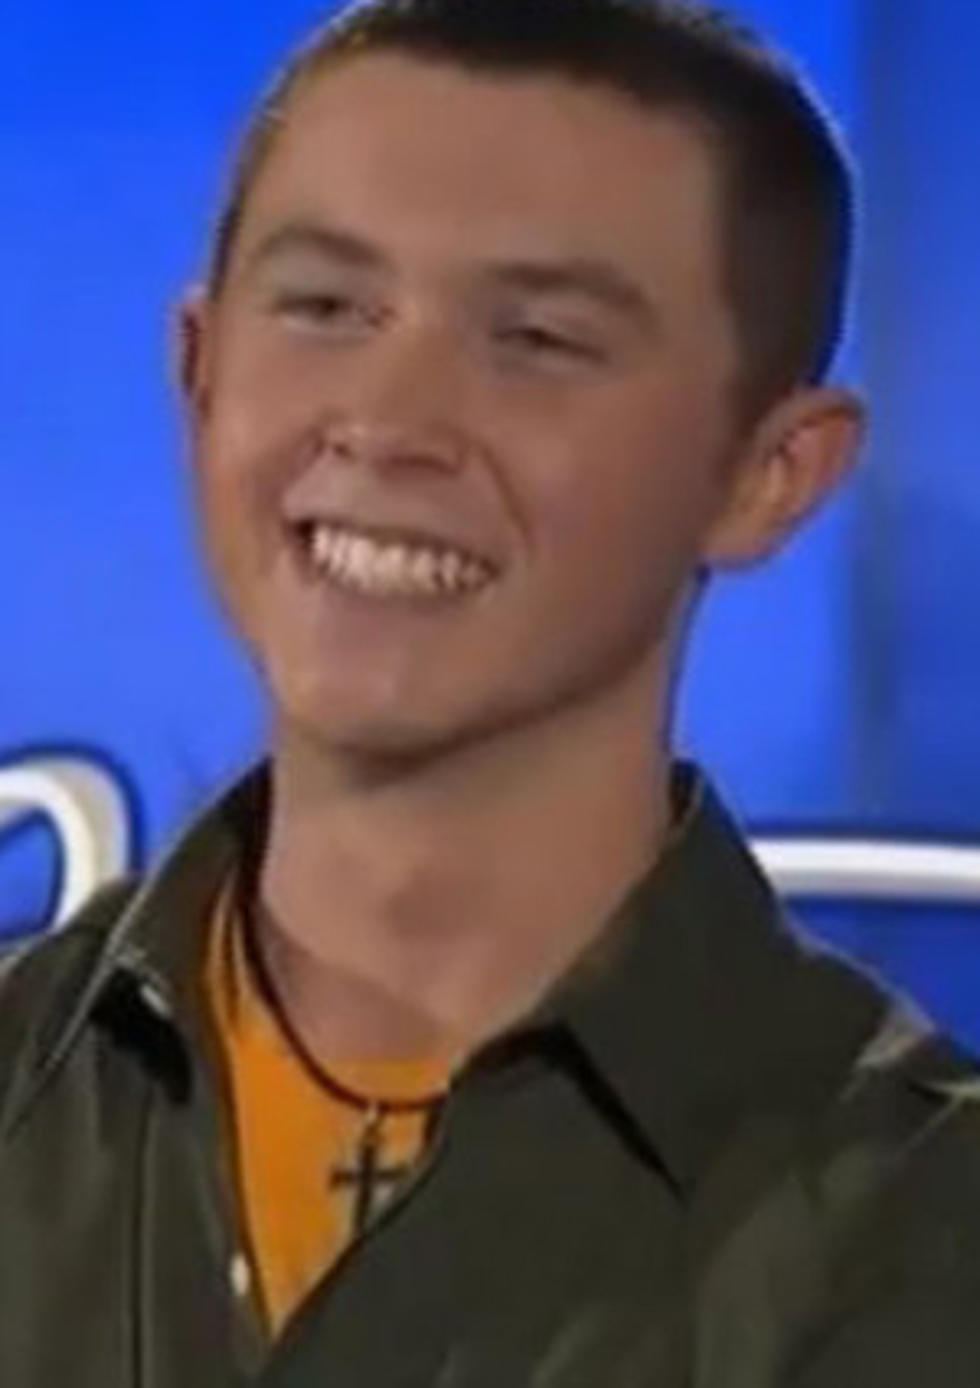 Scott McCreery Is a Top 24 ‘American Idol’ Contestant